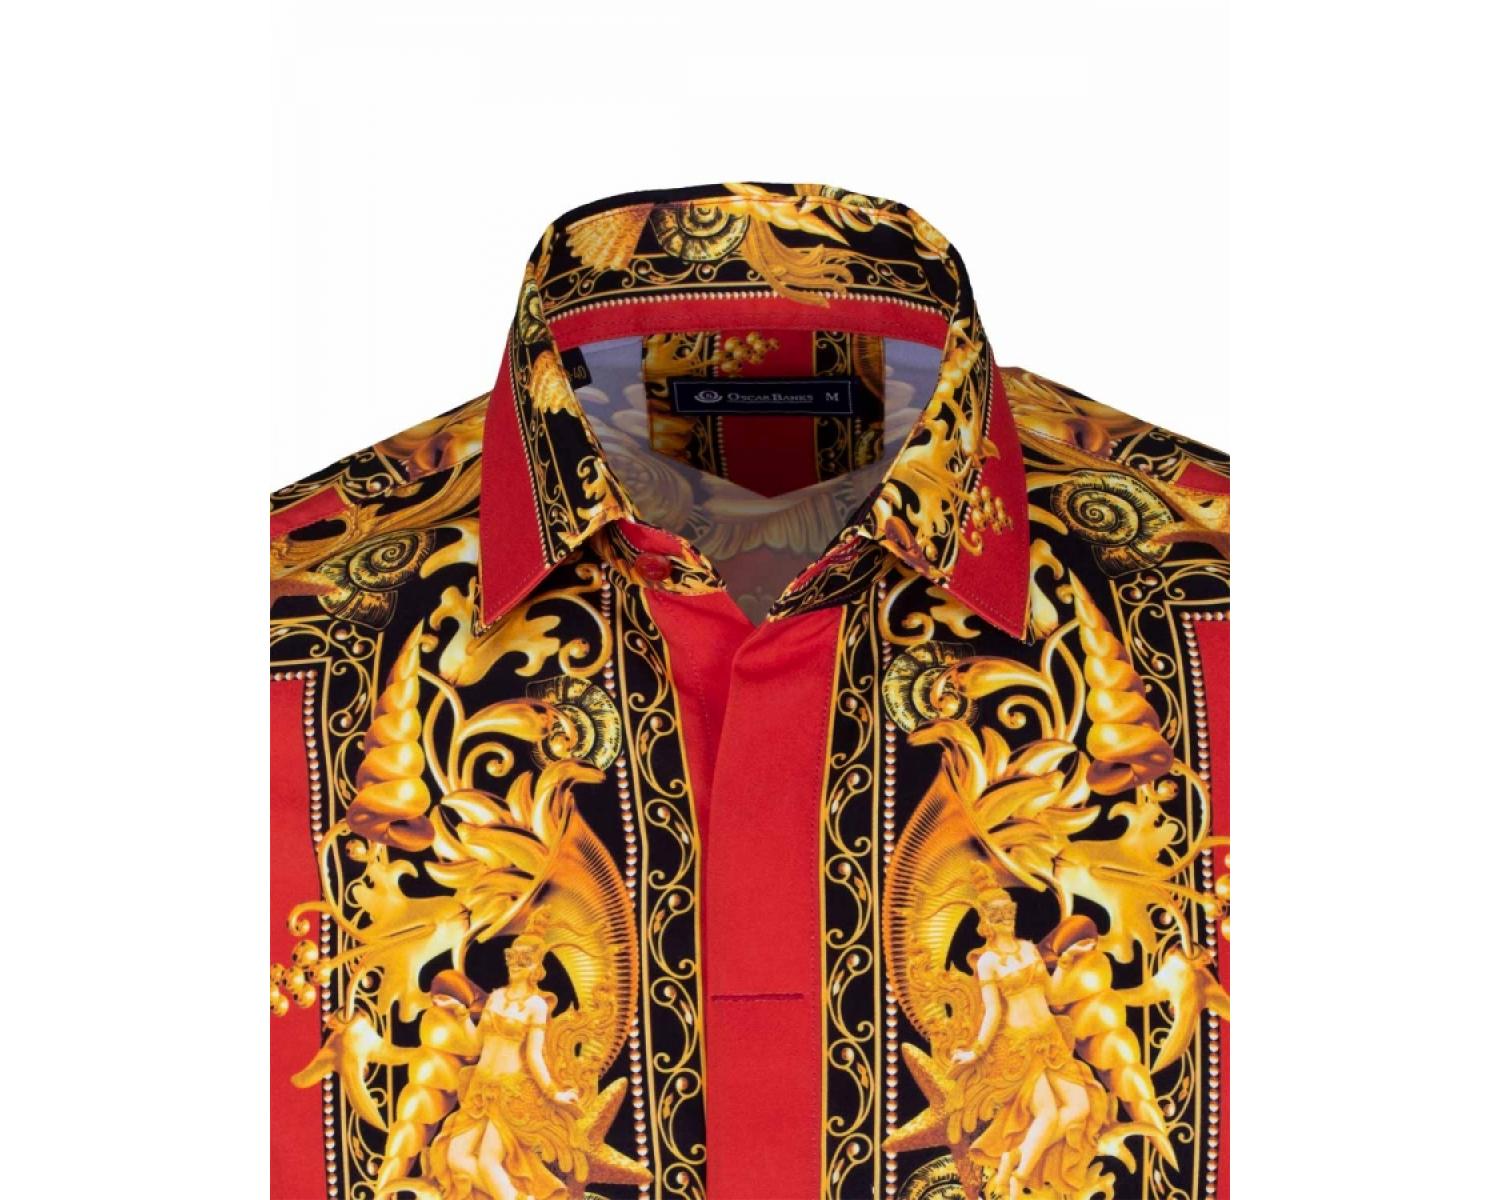 Buy > versace style shirt > in stock